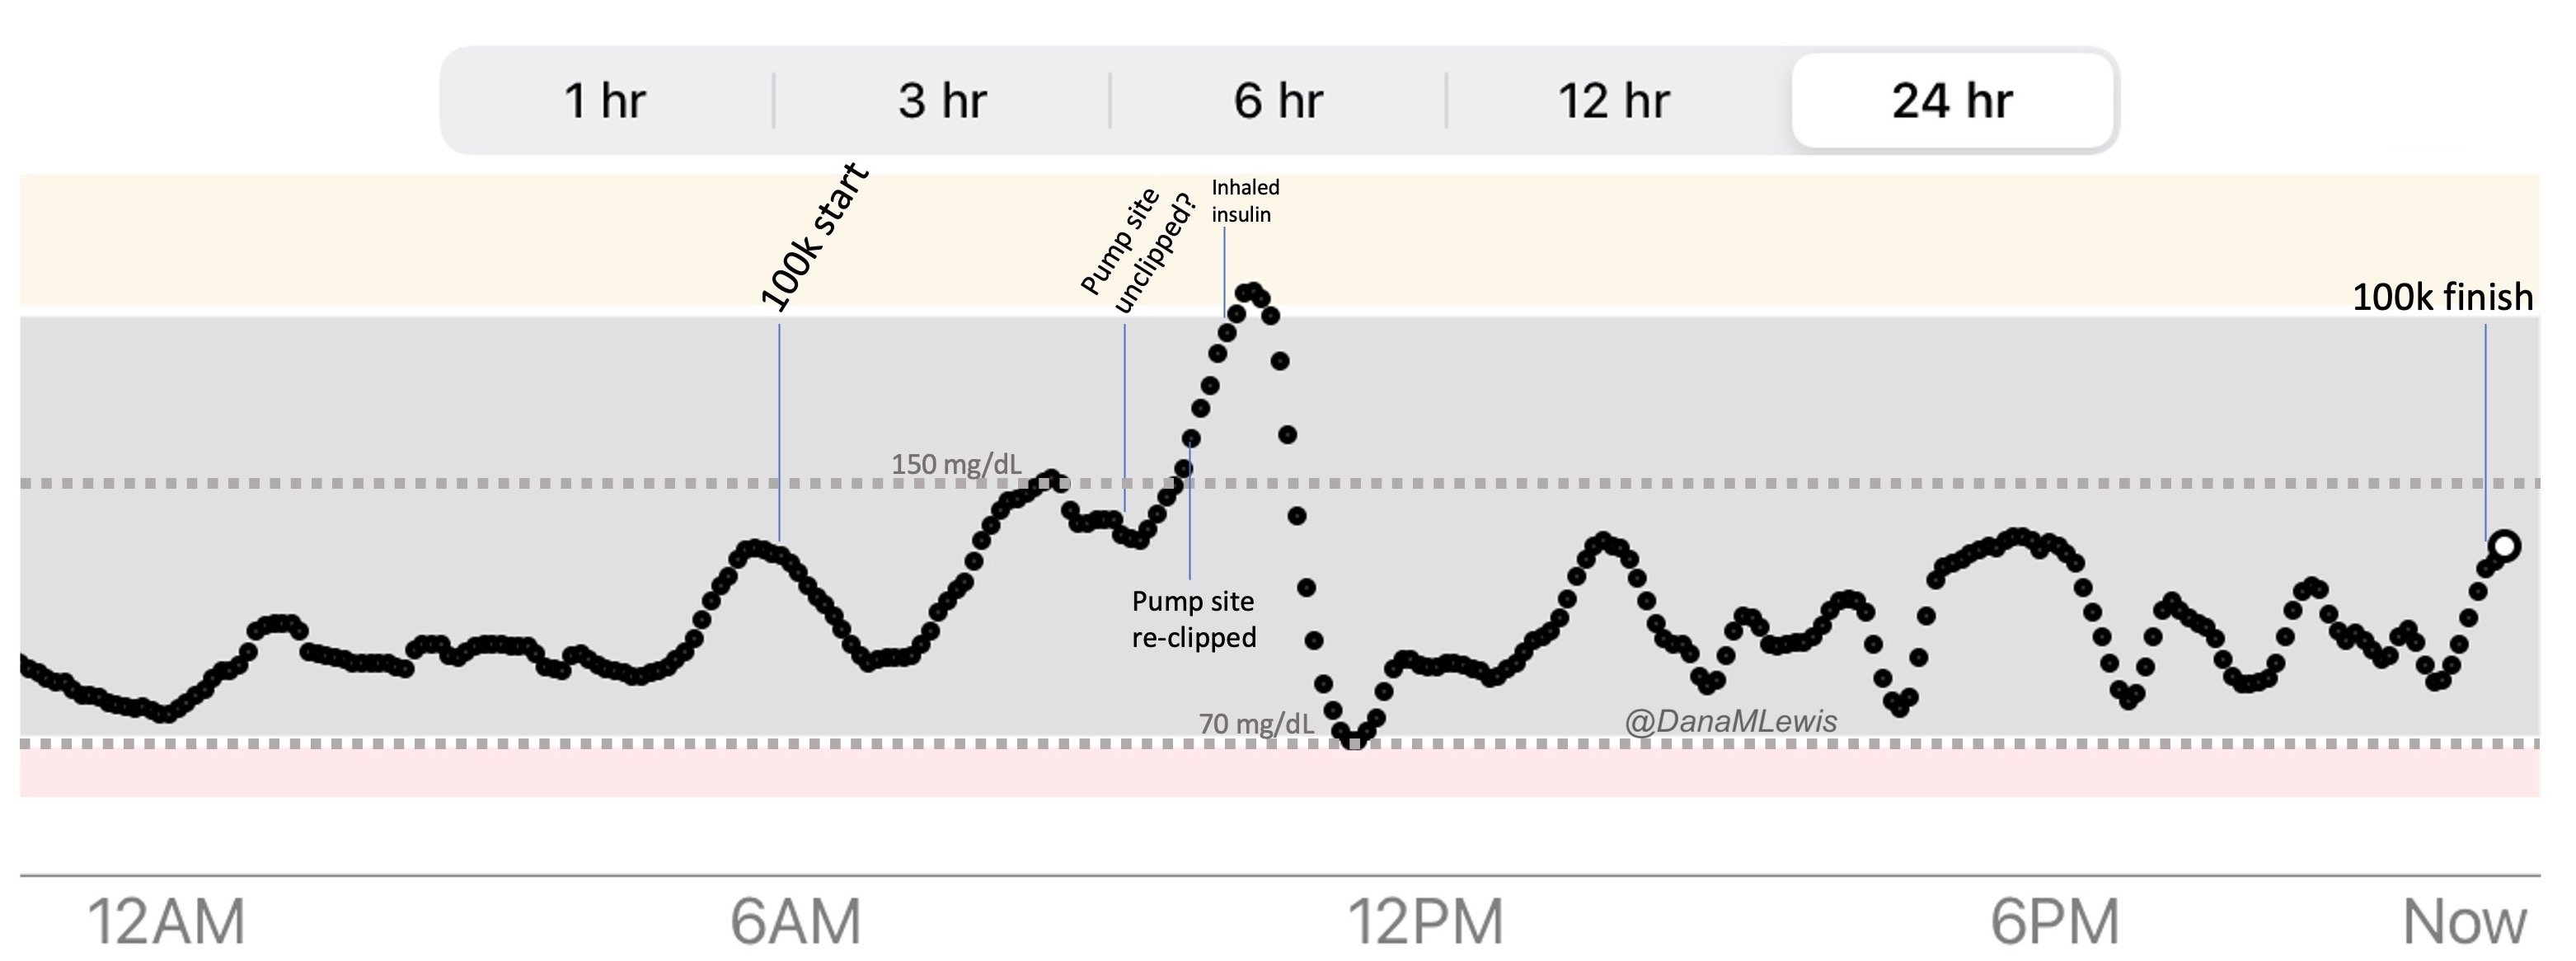 A 24 hour view of my CGM graph to show my glucose levels before (overnight), during the run including marks where my pump site likely unclipped, where I reclipped it, and how my glucose was in range for the remainder of the run. 